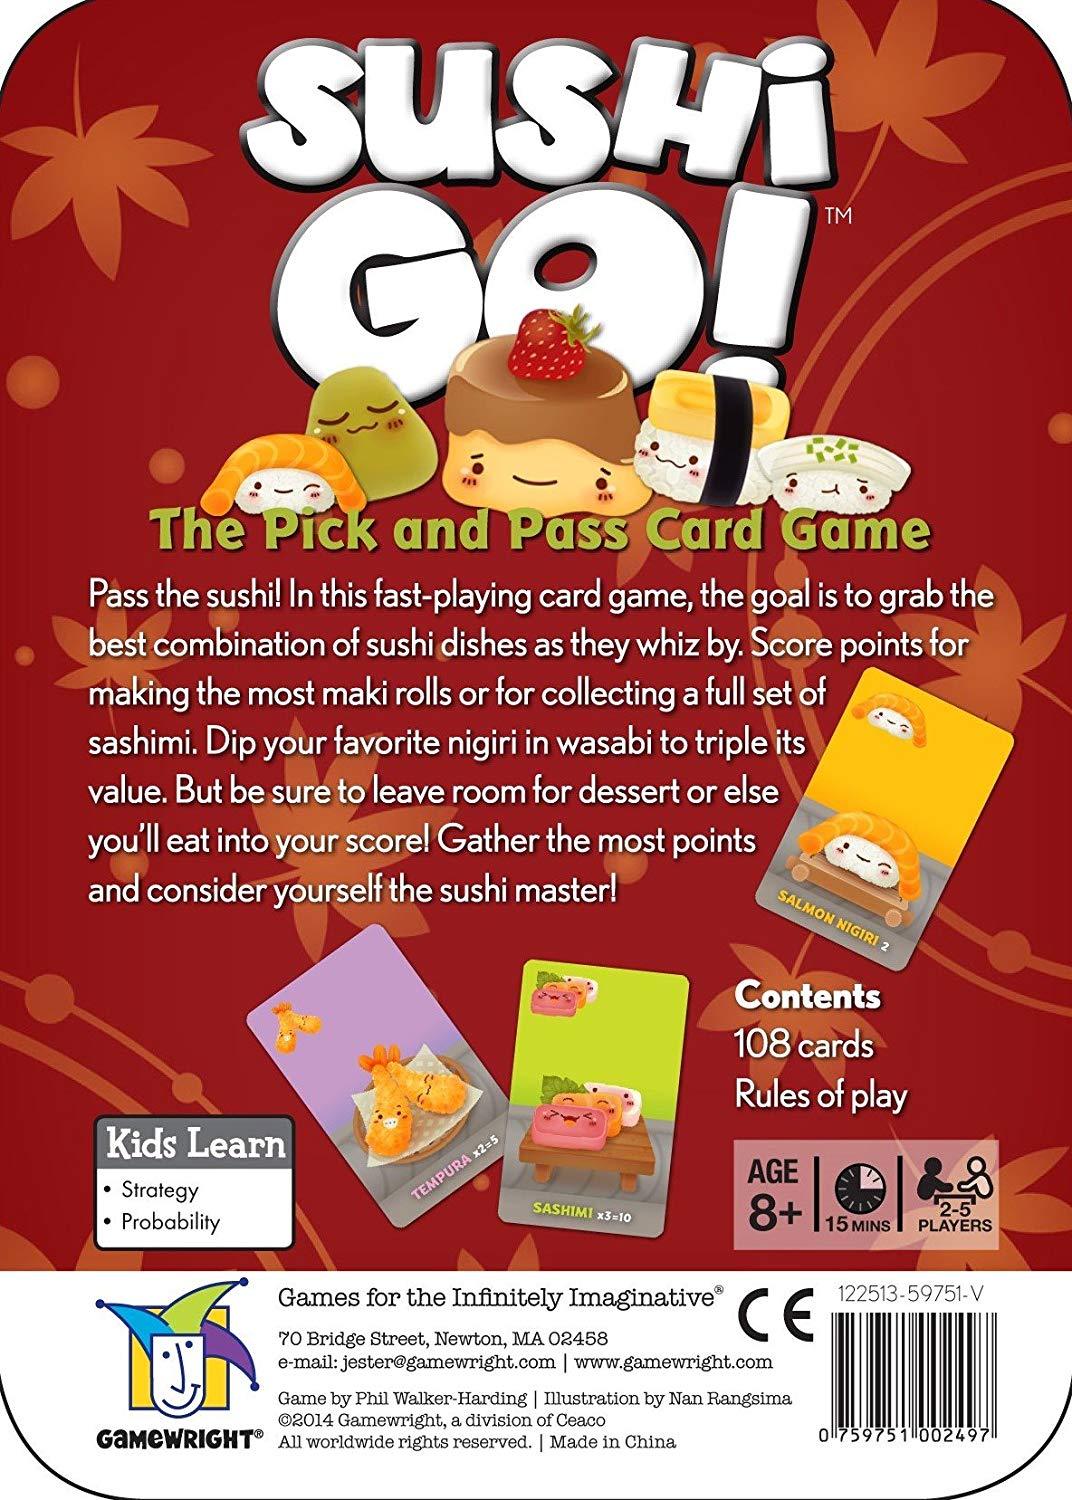 Sushi Go! | The CG Realm